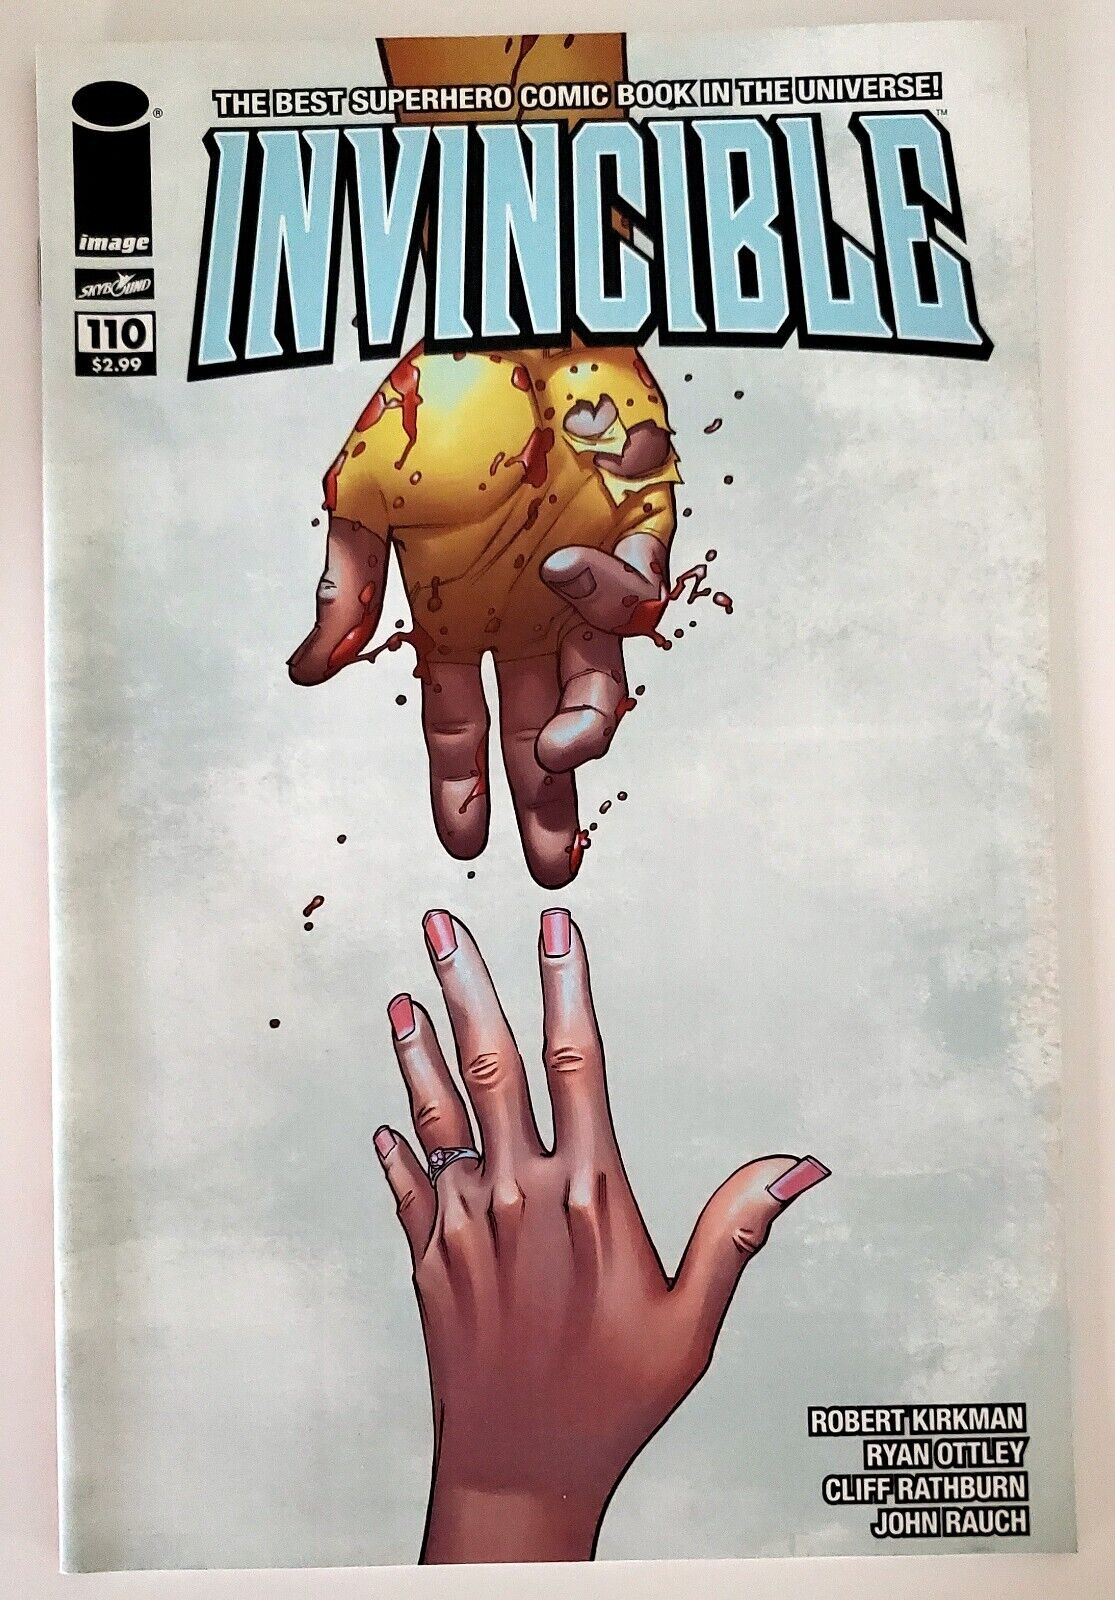 INVINCIBLE #110, Robert Kirkman/Ryan Ottley, Controversial Issue First Printing.